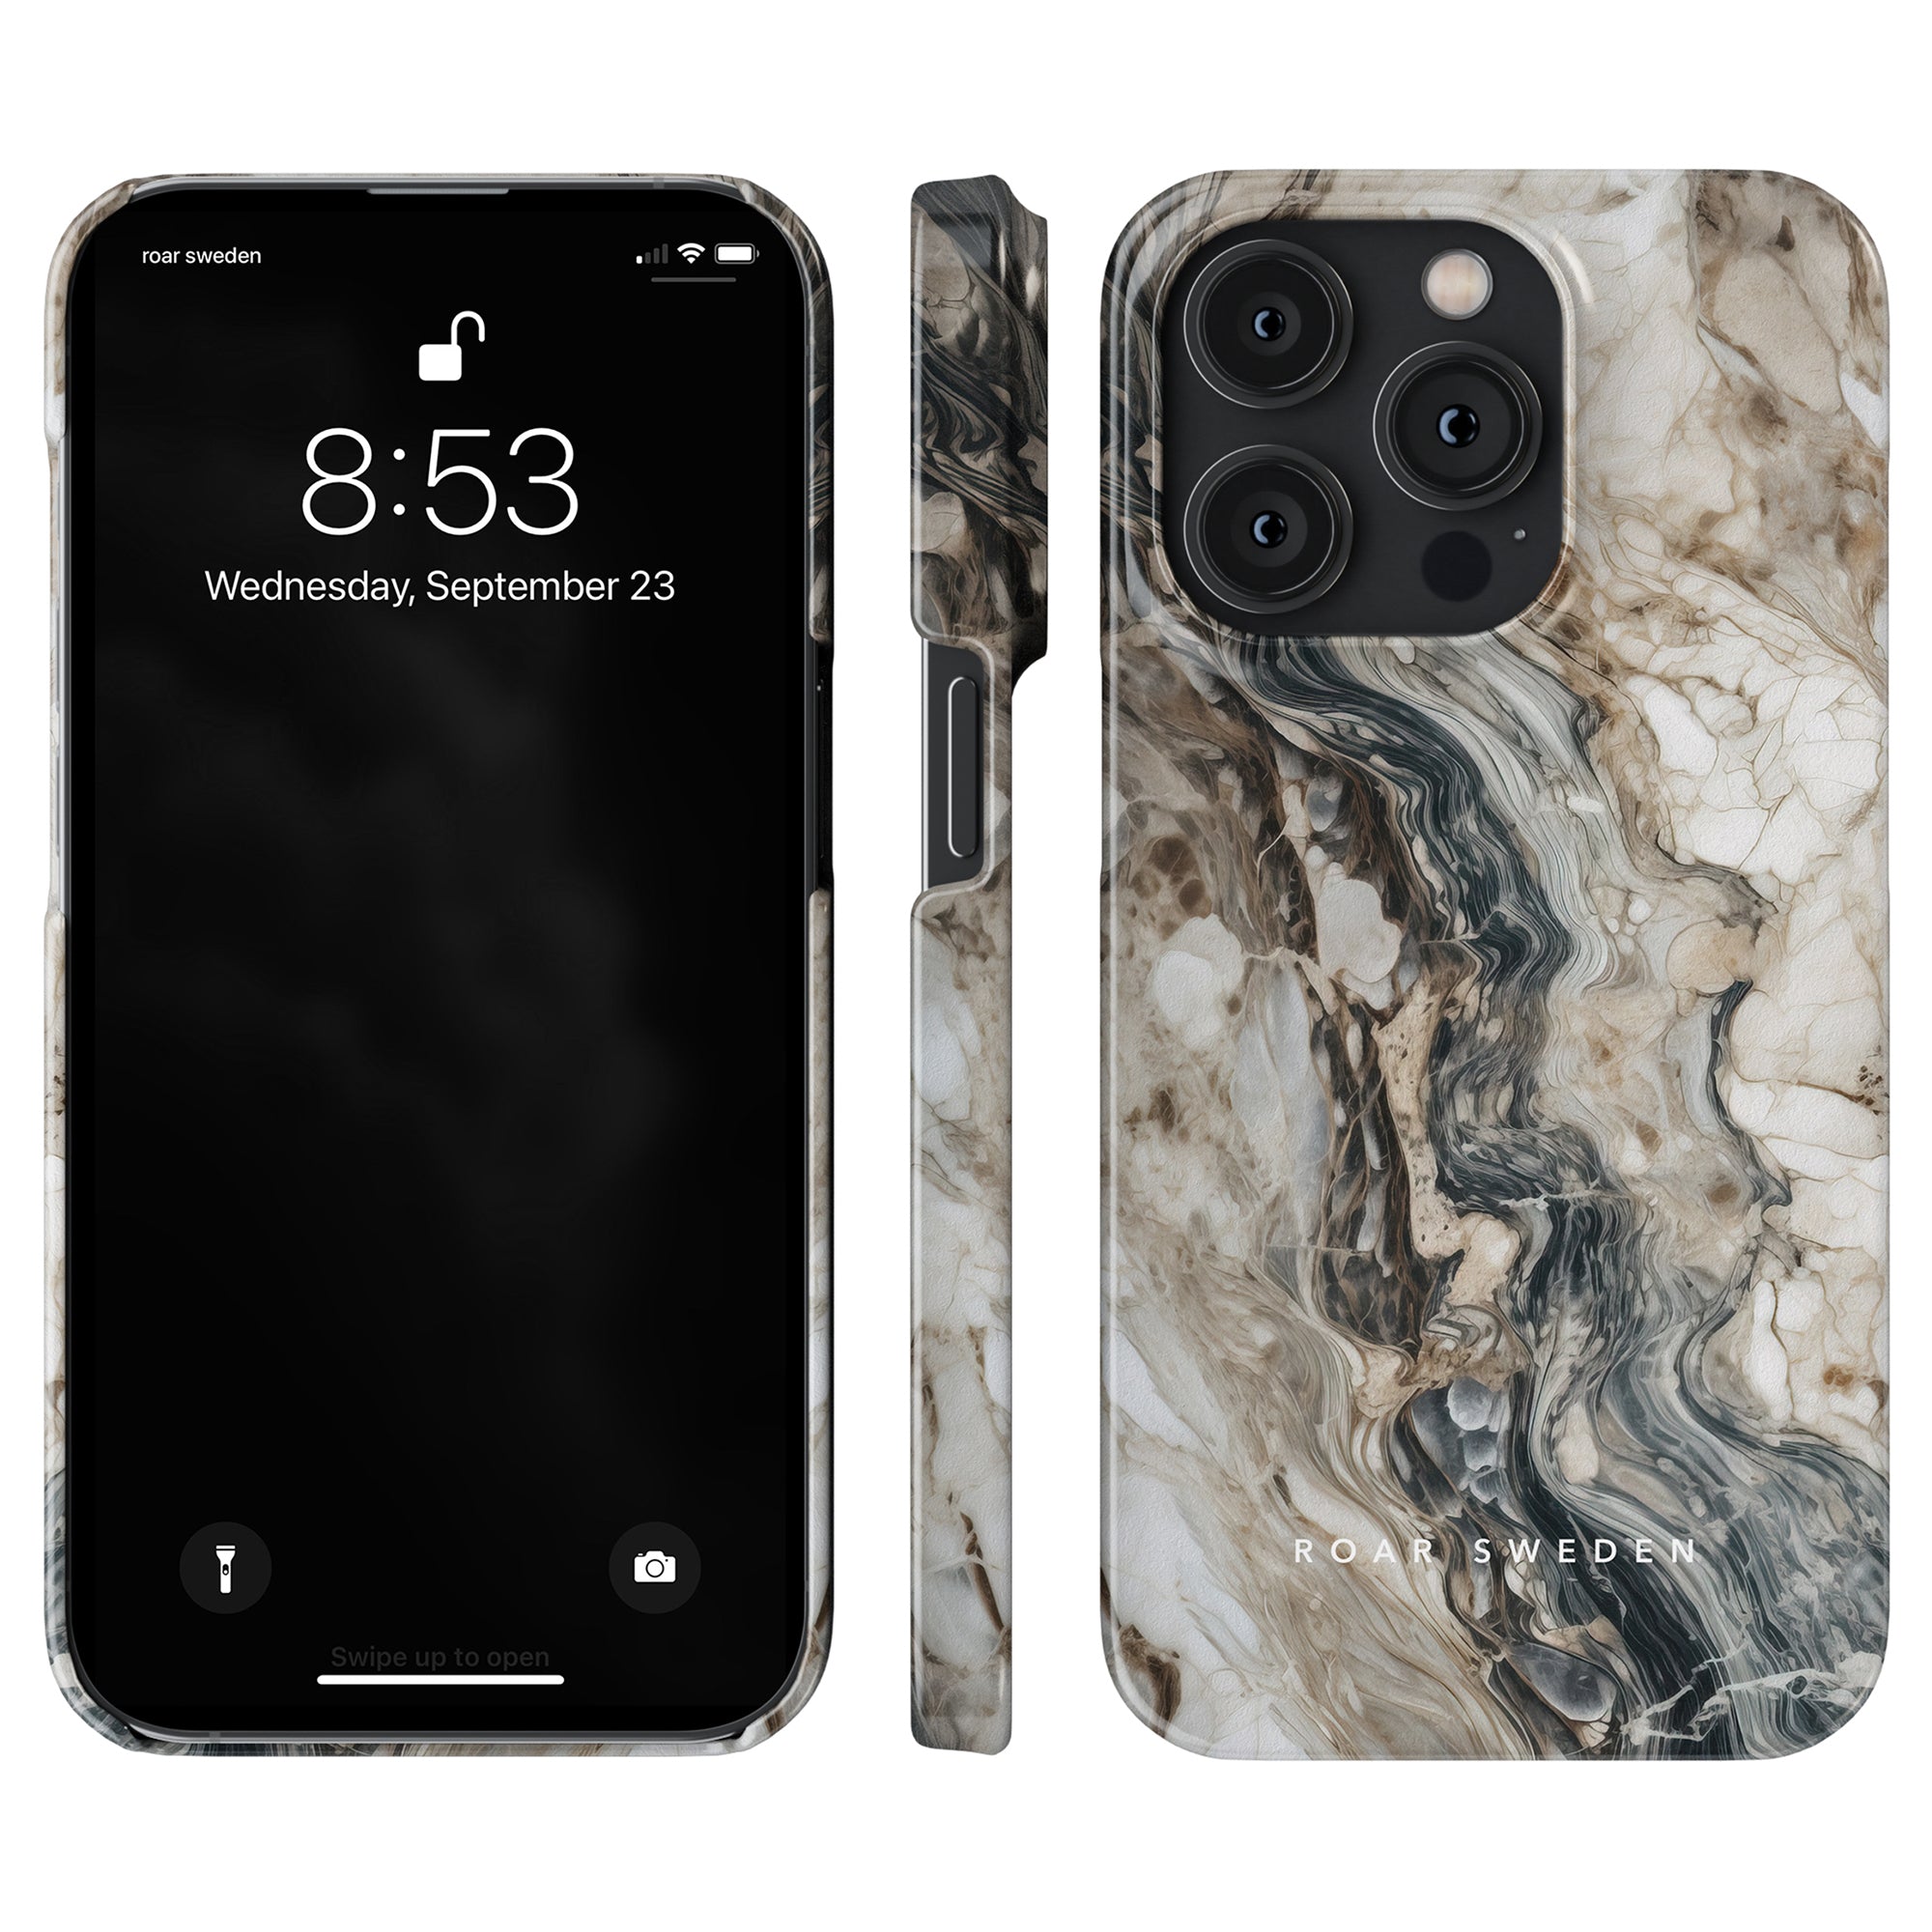 Image of a smartphone with a marble-patterned Napoleon - Slim Case from Roar Sweden’s Ocean-kollektion, displaying the lock screen with the time at 8:53 and the date Wednesday, September 23. The högsta kvalité case is shown from the back and side.